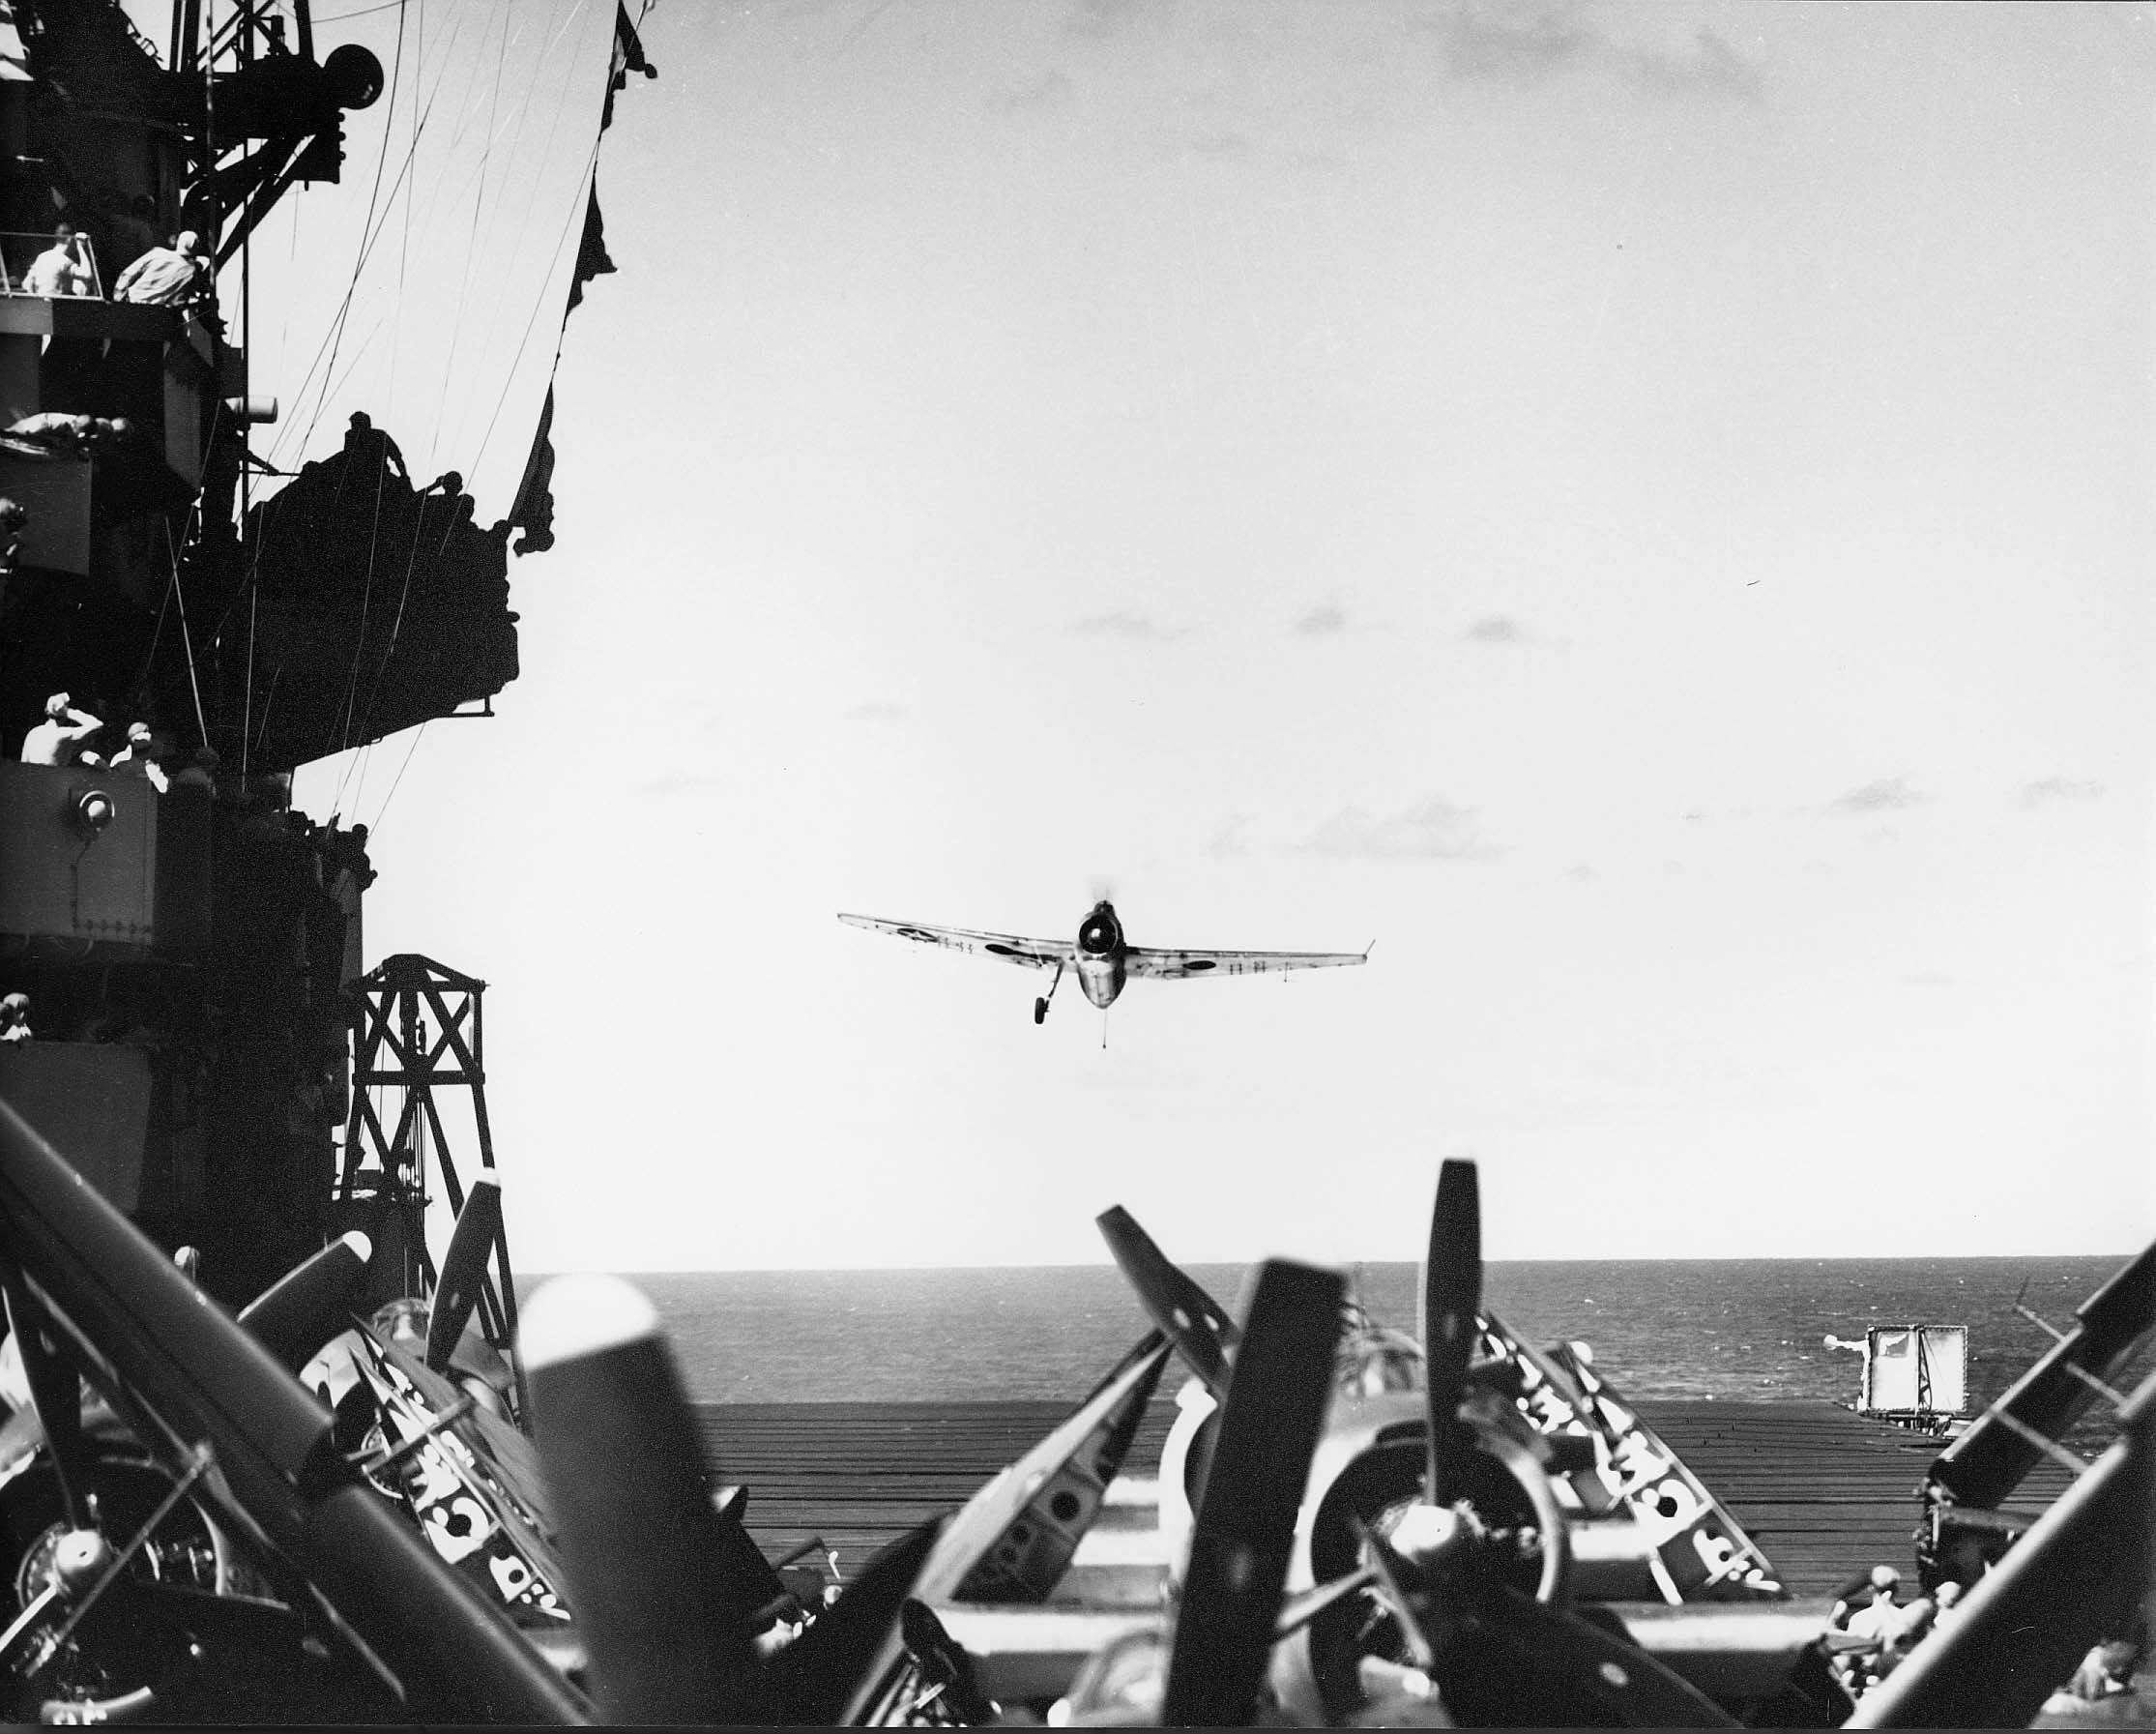 TBM-3 Avenger, with Torpedo Squadron Eighty-Three (VT-83), approaching CV-9 (USS Essex) for a ...jpg